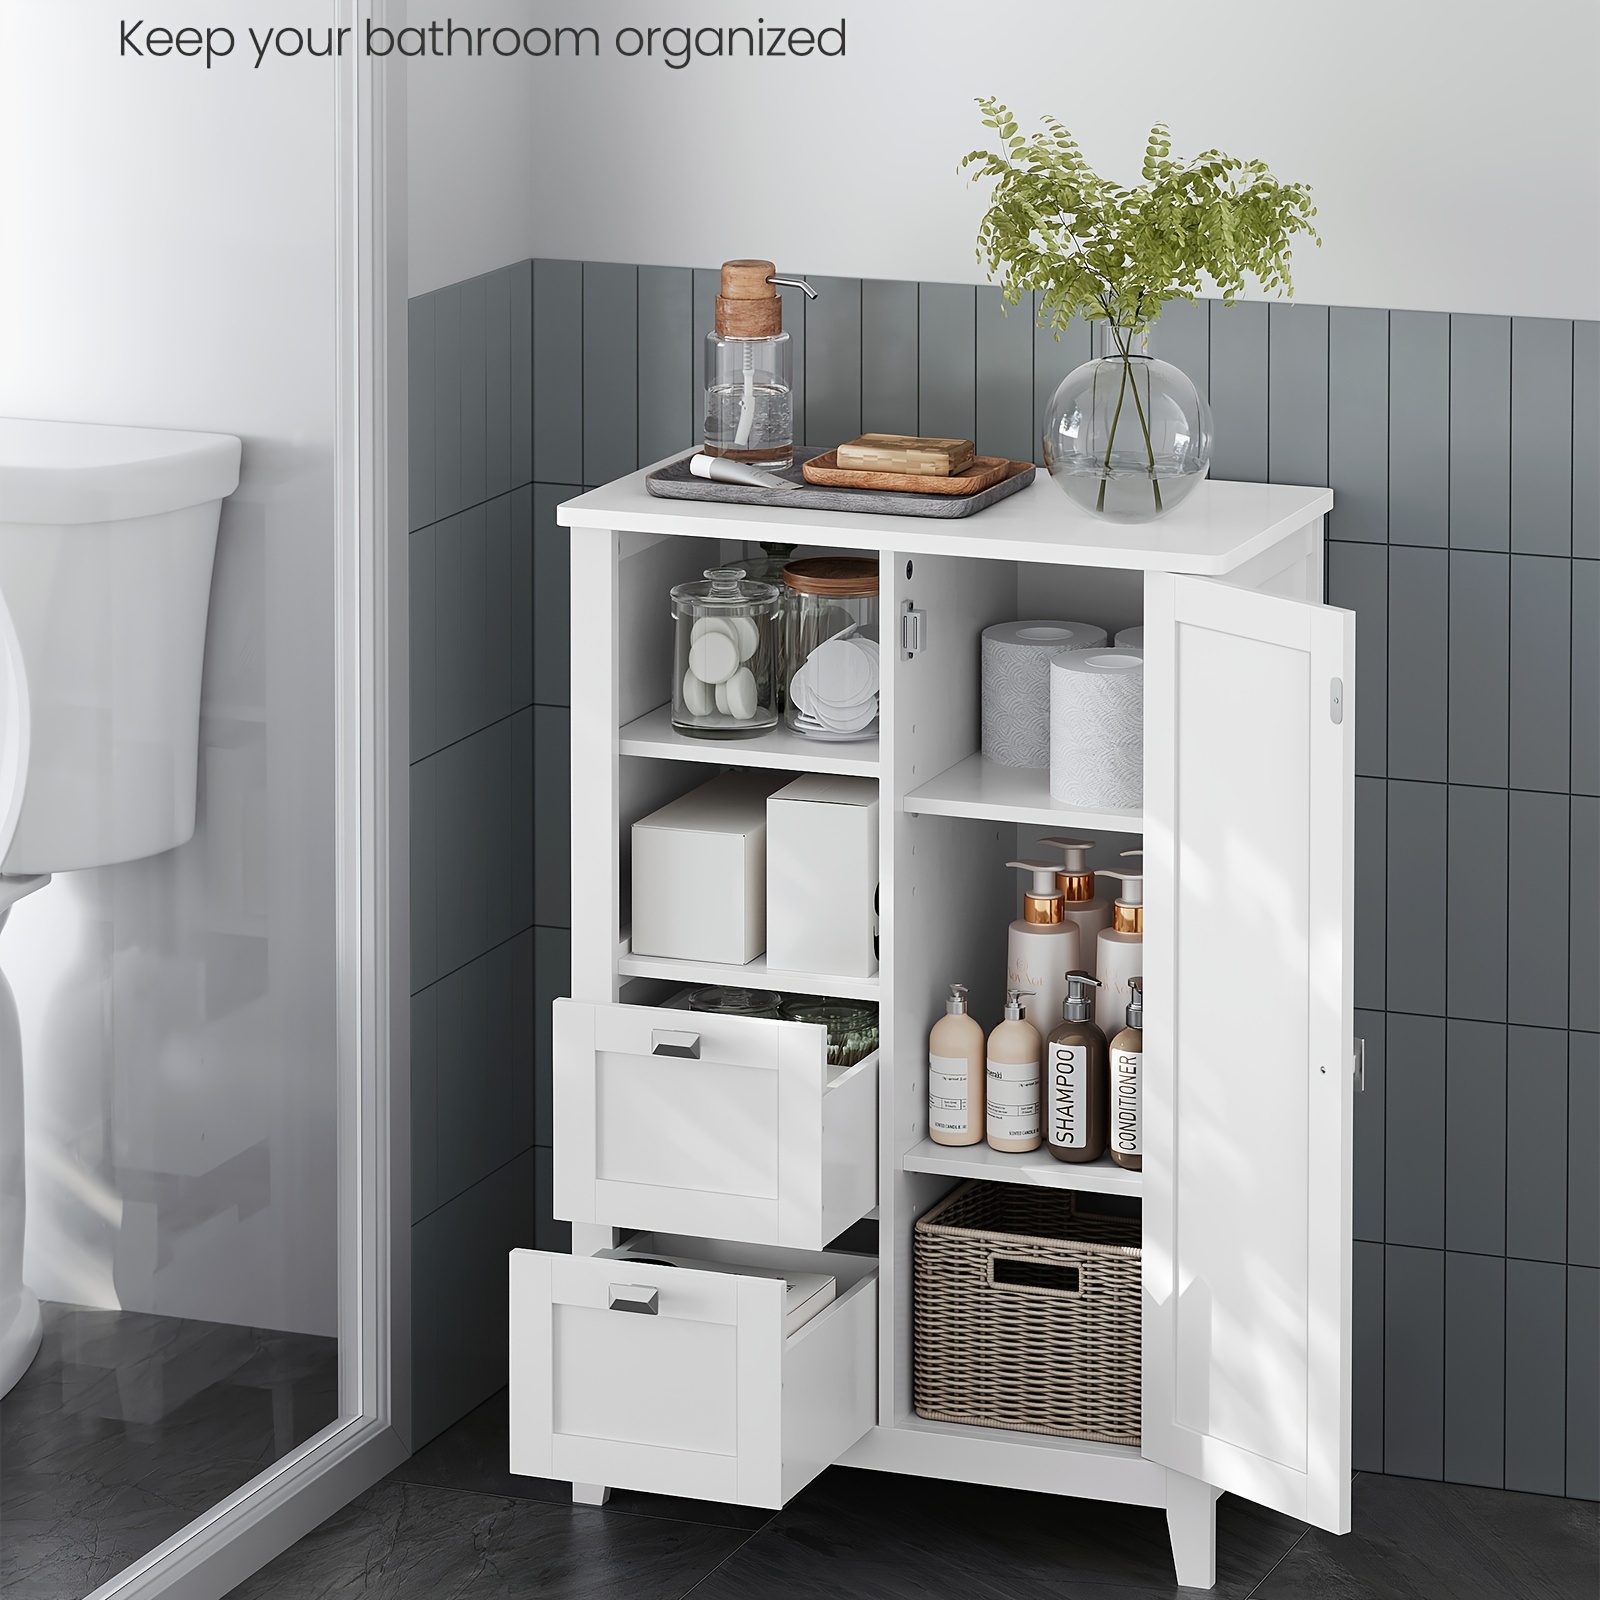 

Vasagle Bathroom Floor Storage Cabinet, Bathroom Cabinet Freestanding, Kitchen Cabinet, With Open Compartment, 2 Drawers, Adjustable Shelves, 11.8 X 21.7 X 31.5 Inches, White